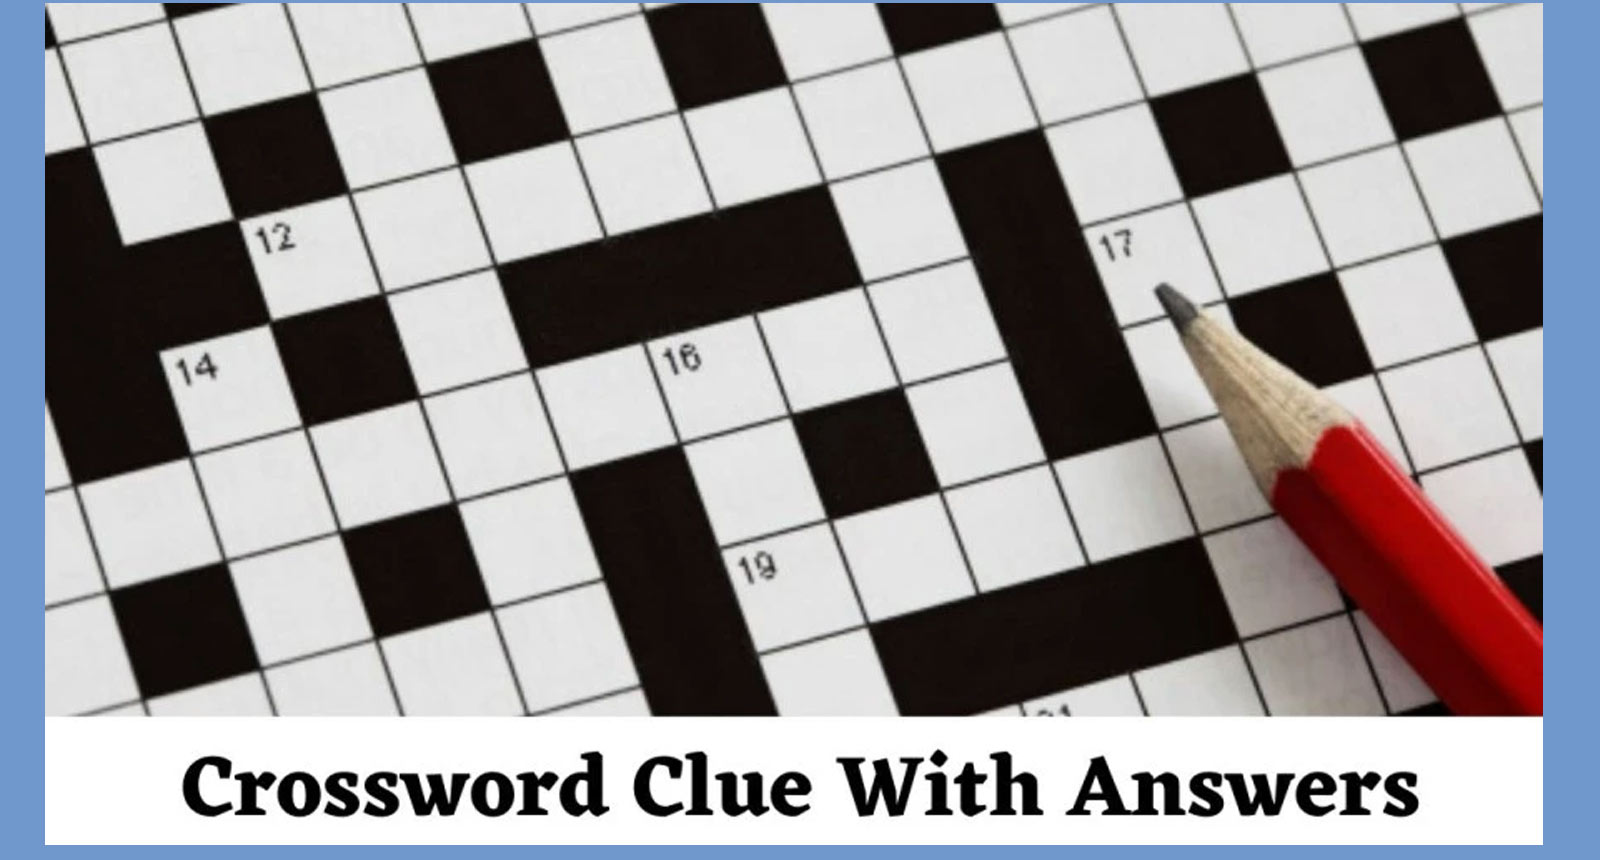 Unlocking the Secrets of NYT Crossword Clues: The Power of Four Digits